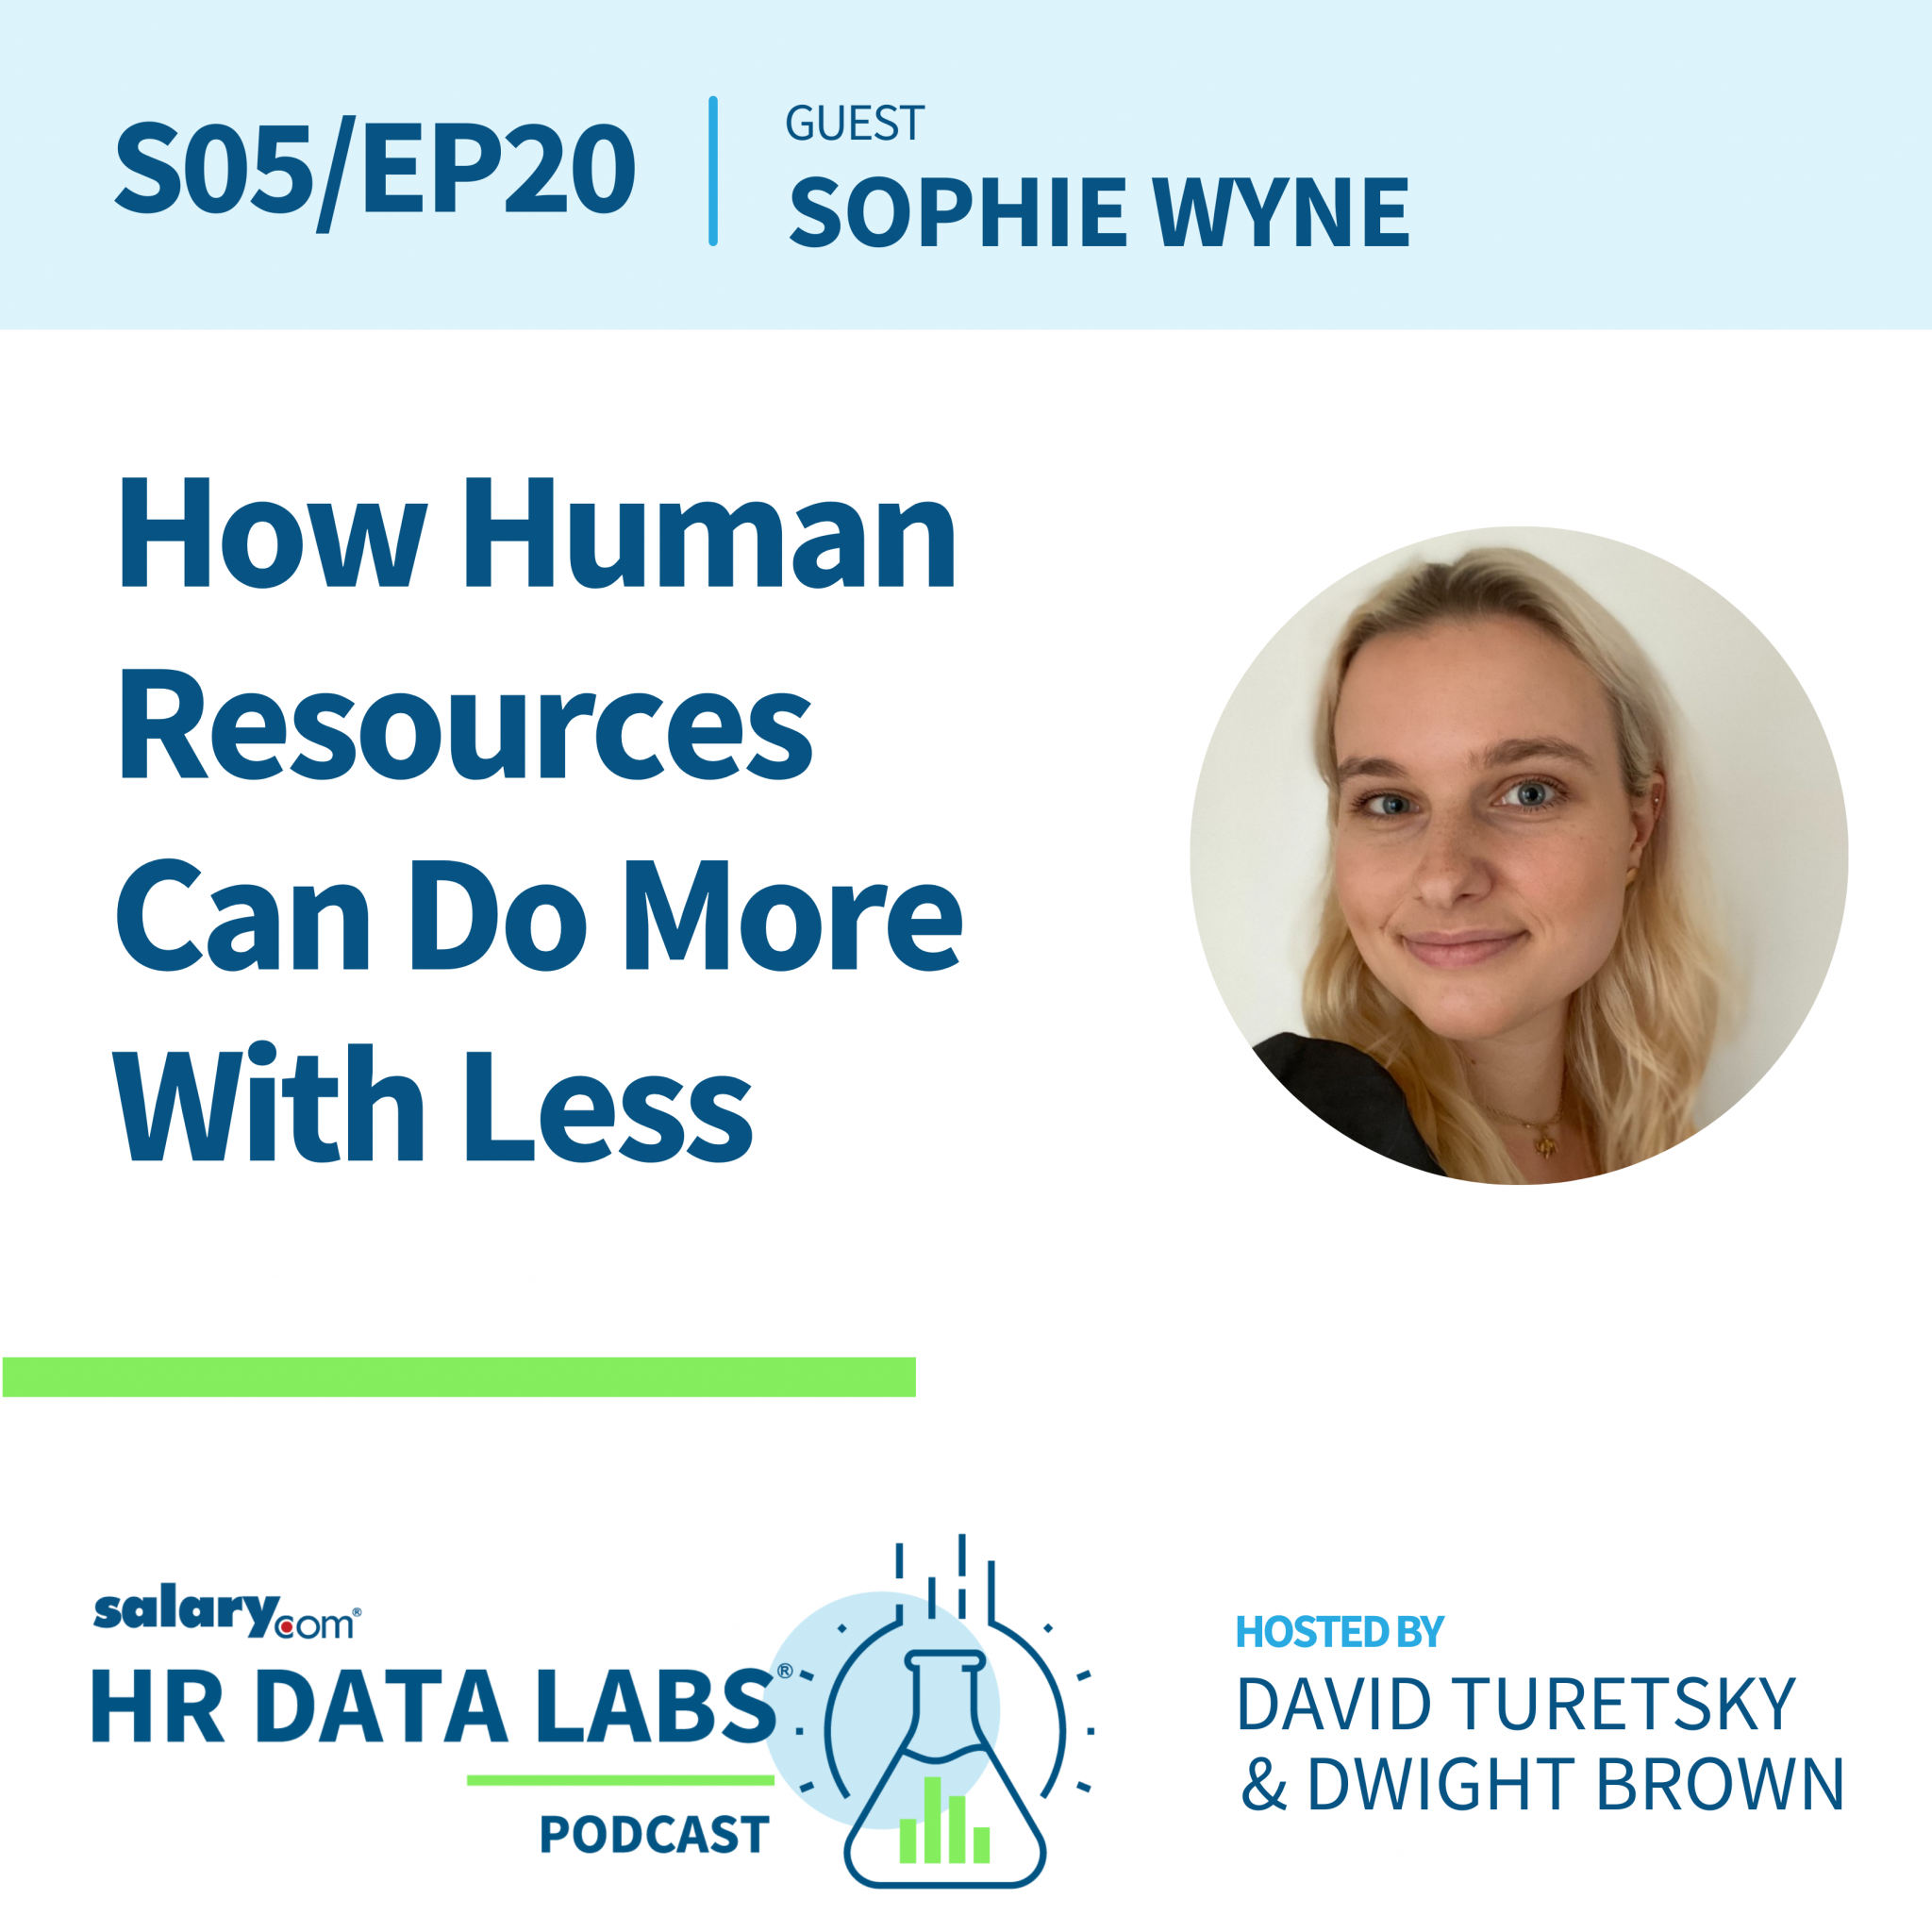 Sophie Wyne – How Human Resources Can Do More With Less